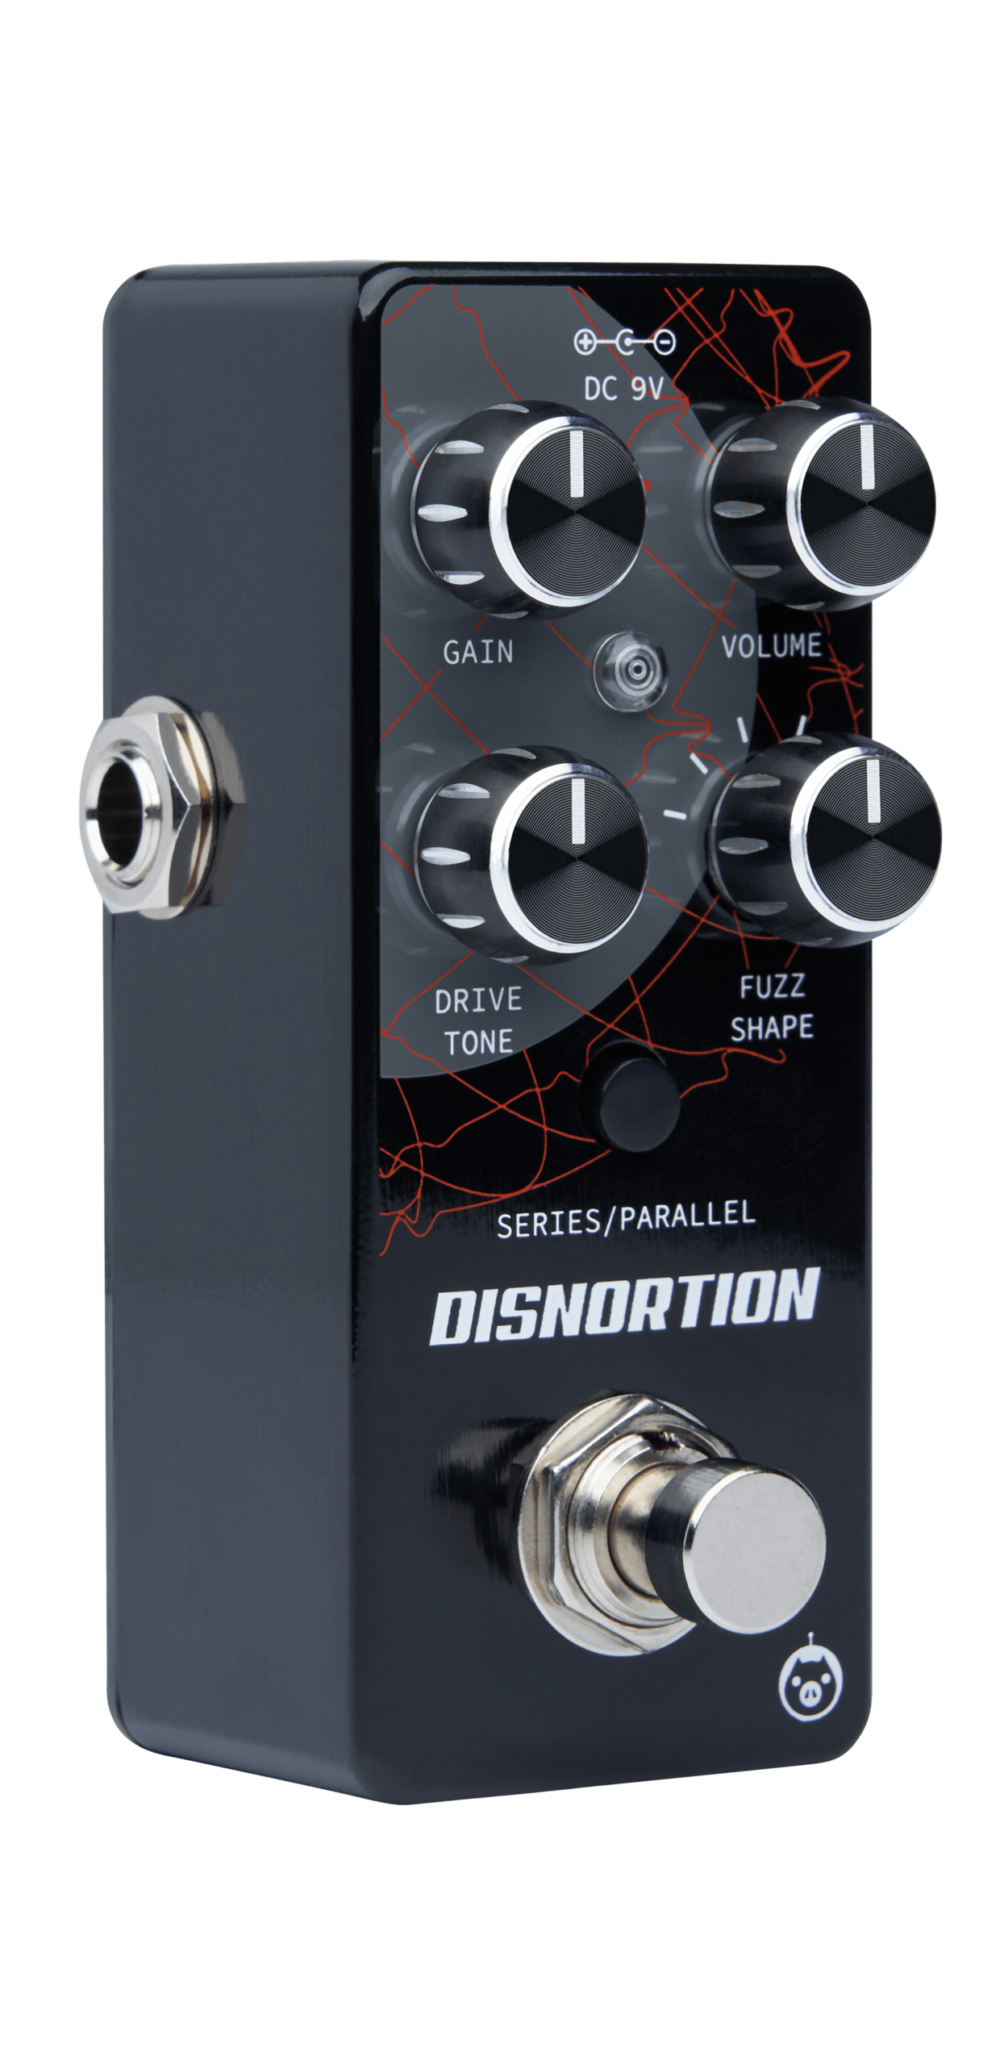 Bold and iconic front view of the DISNORTION pedal, a powerhouse of distorted sonic expression.